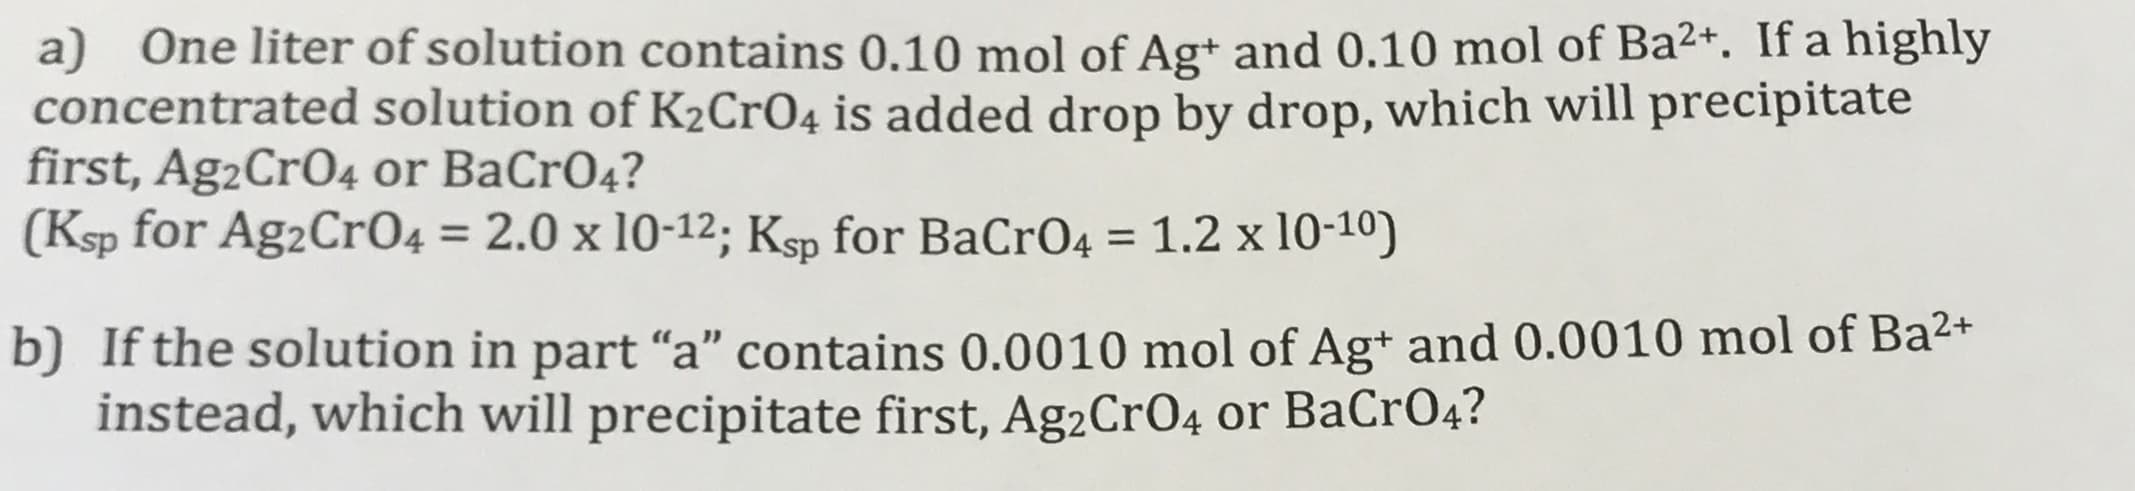 a) One liter of solution contains 0.10 mol of Ag+ and 0.10 mol of Ba2+. If a highly
concentrated solution of K2CrO4 is added drop by drop, which will precipitate
first, Ag2CrO4 or BaCrO4?
(Ksp for Ag2CrO4 = 2.0 x 10-12; Ksp for BaCrO4 = 1.2 x 10-10)
%3D
%3D
b) If the solution in part “a" contains 0.0010 mol of Ag+ and 0.0010 mol of Ba2+
instead, which will precipitate first, Ag2CrO4 or BaCrO4?
